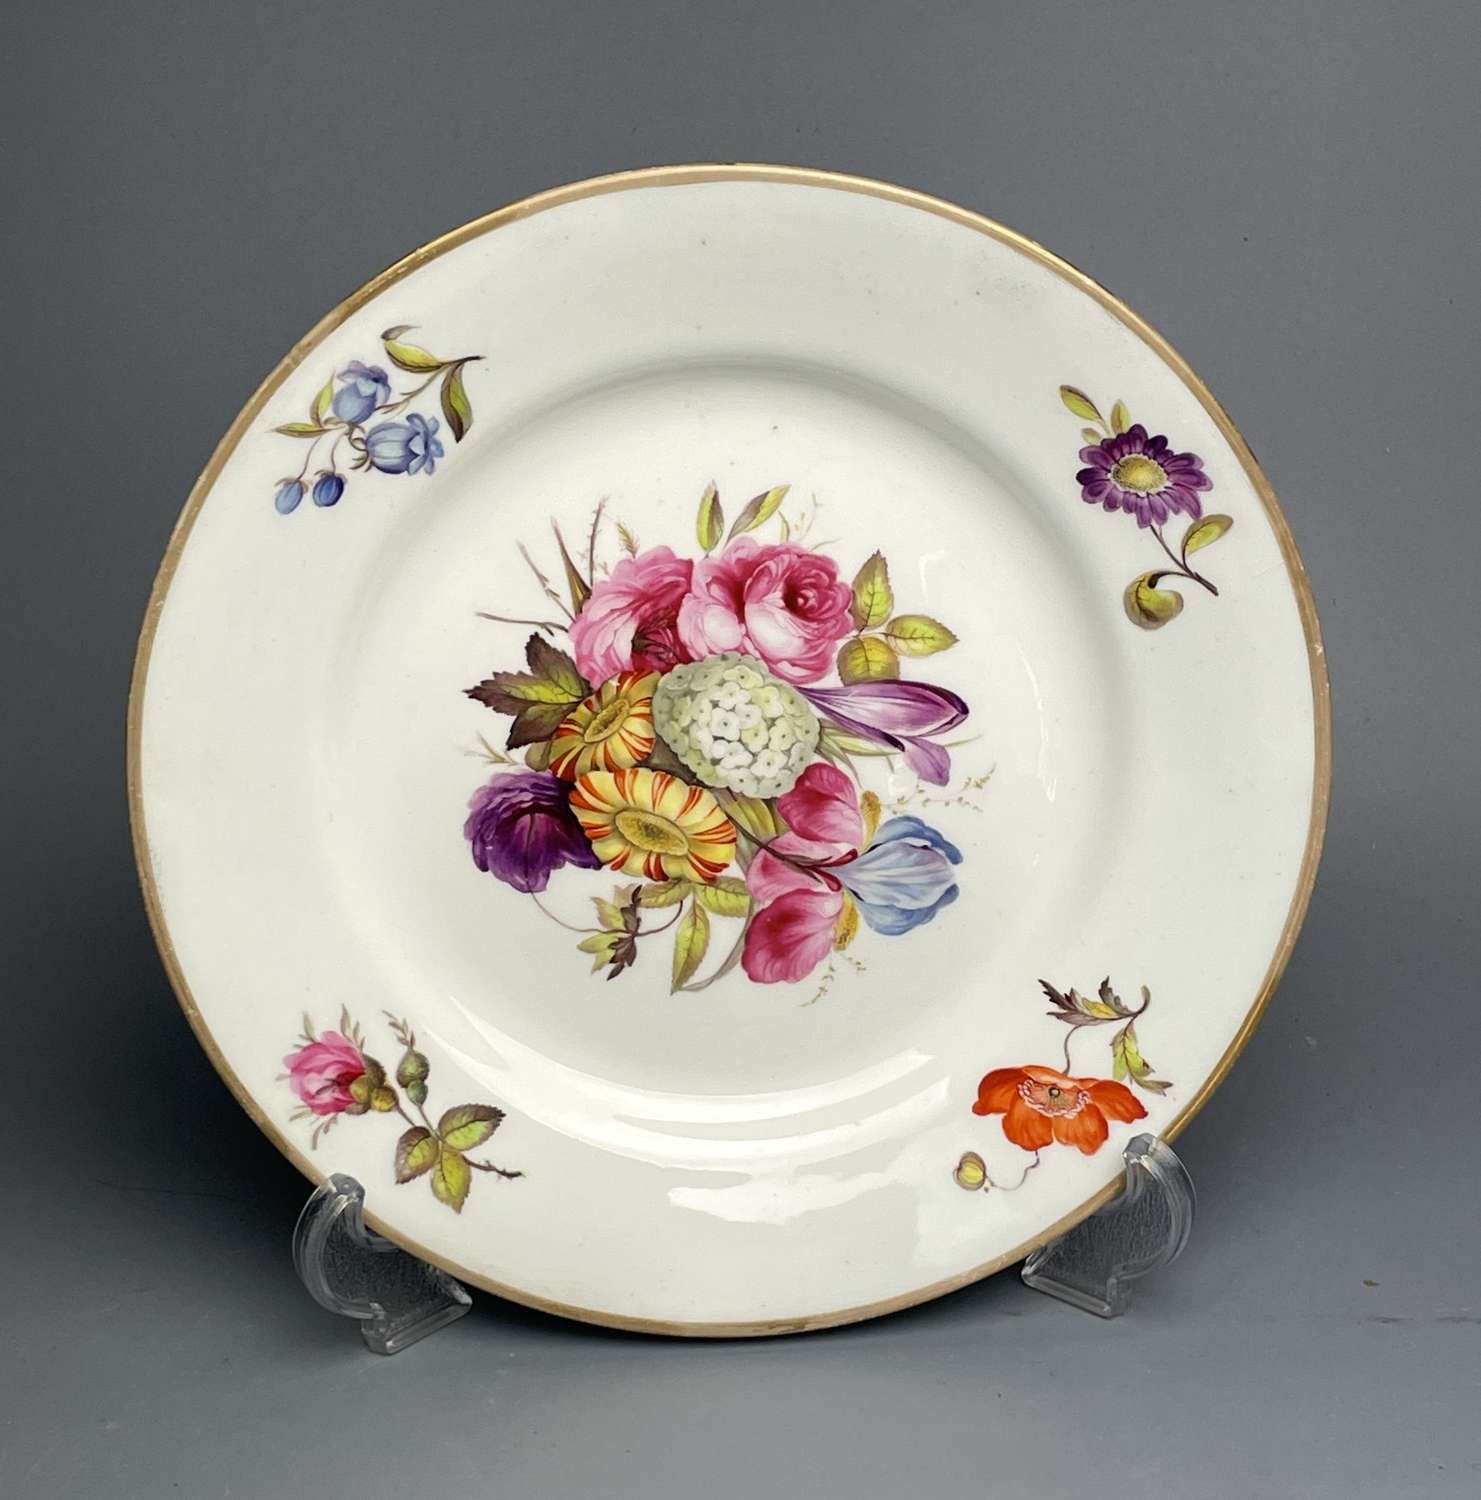 Derby Porcelain Plate circa 1820 Attributed to Moses Webster